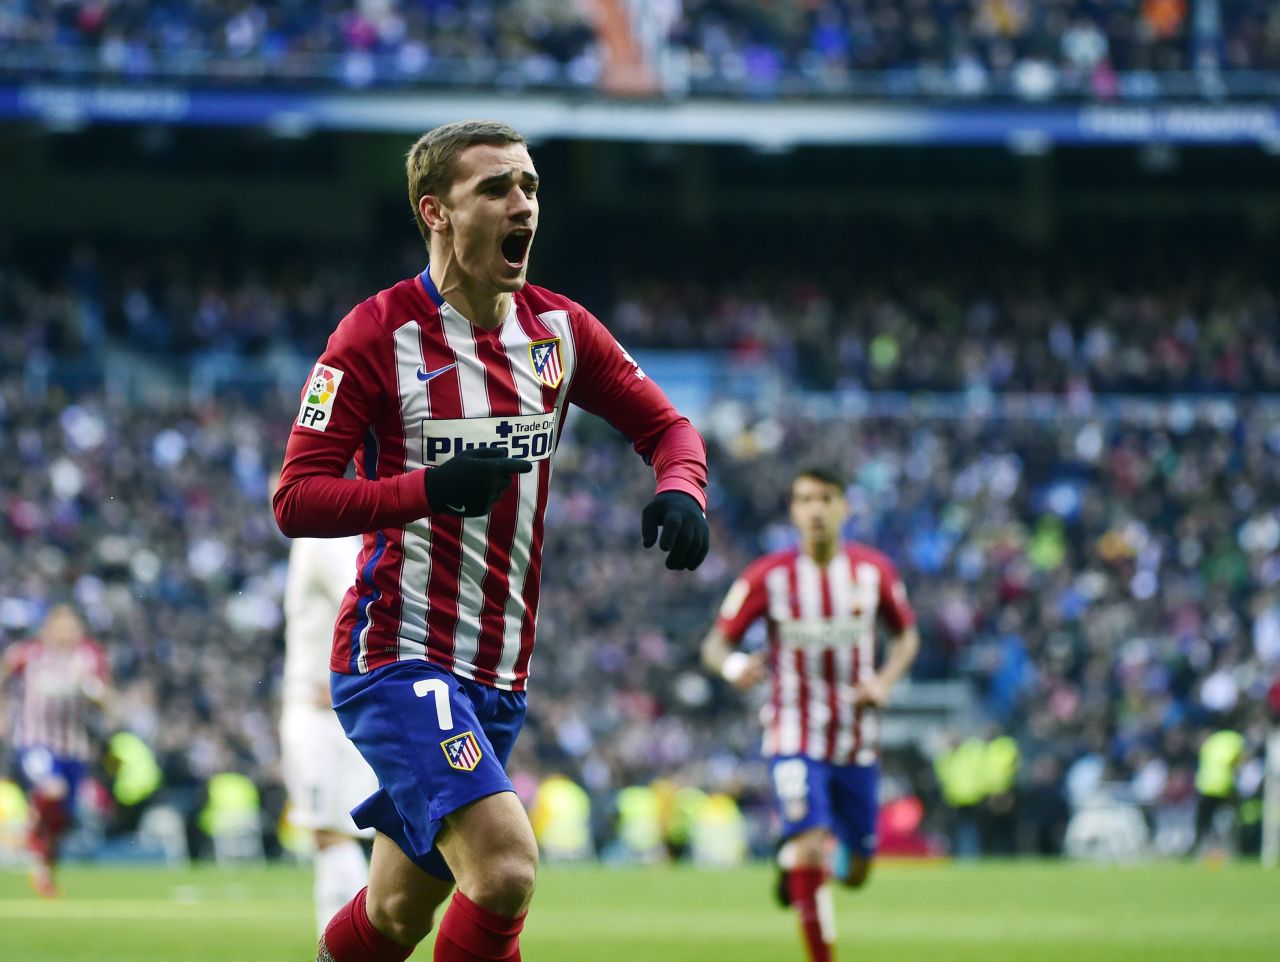 Atletico Madrid's French forward Antoine Griezmann scored the only goal of the game at the Santiago Bernabeu Saturday.